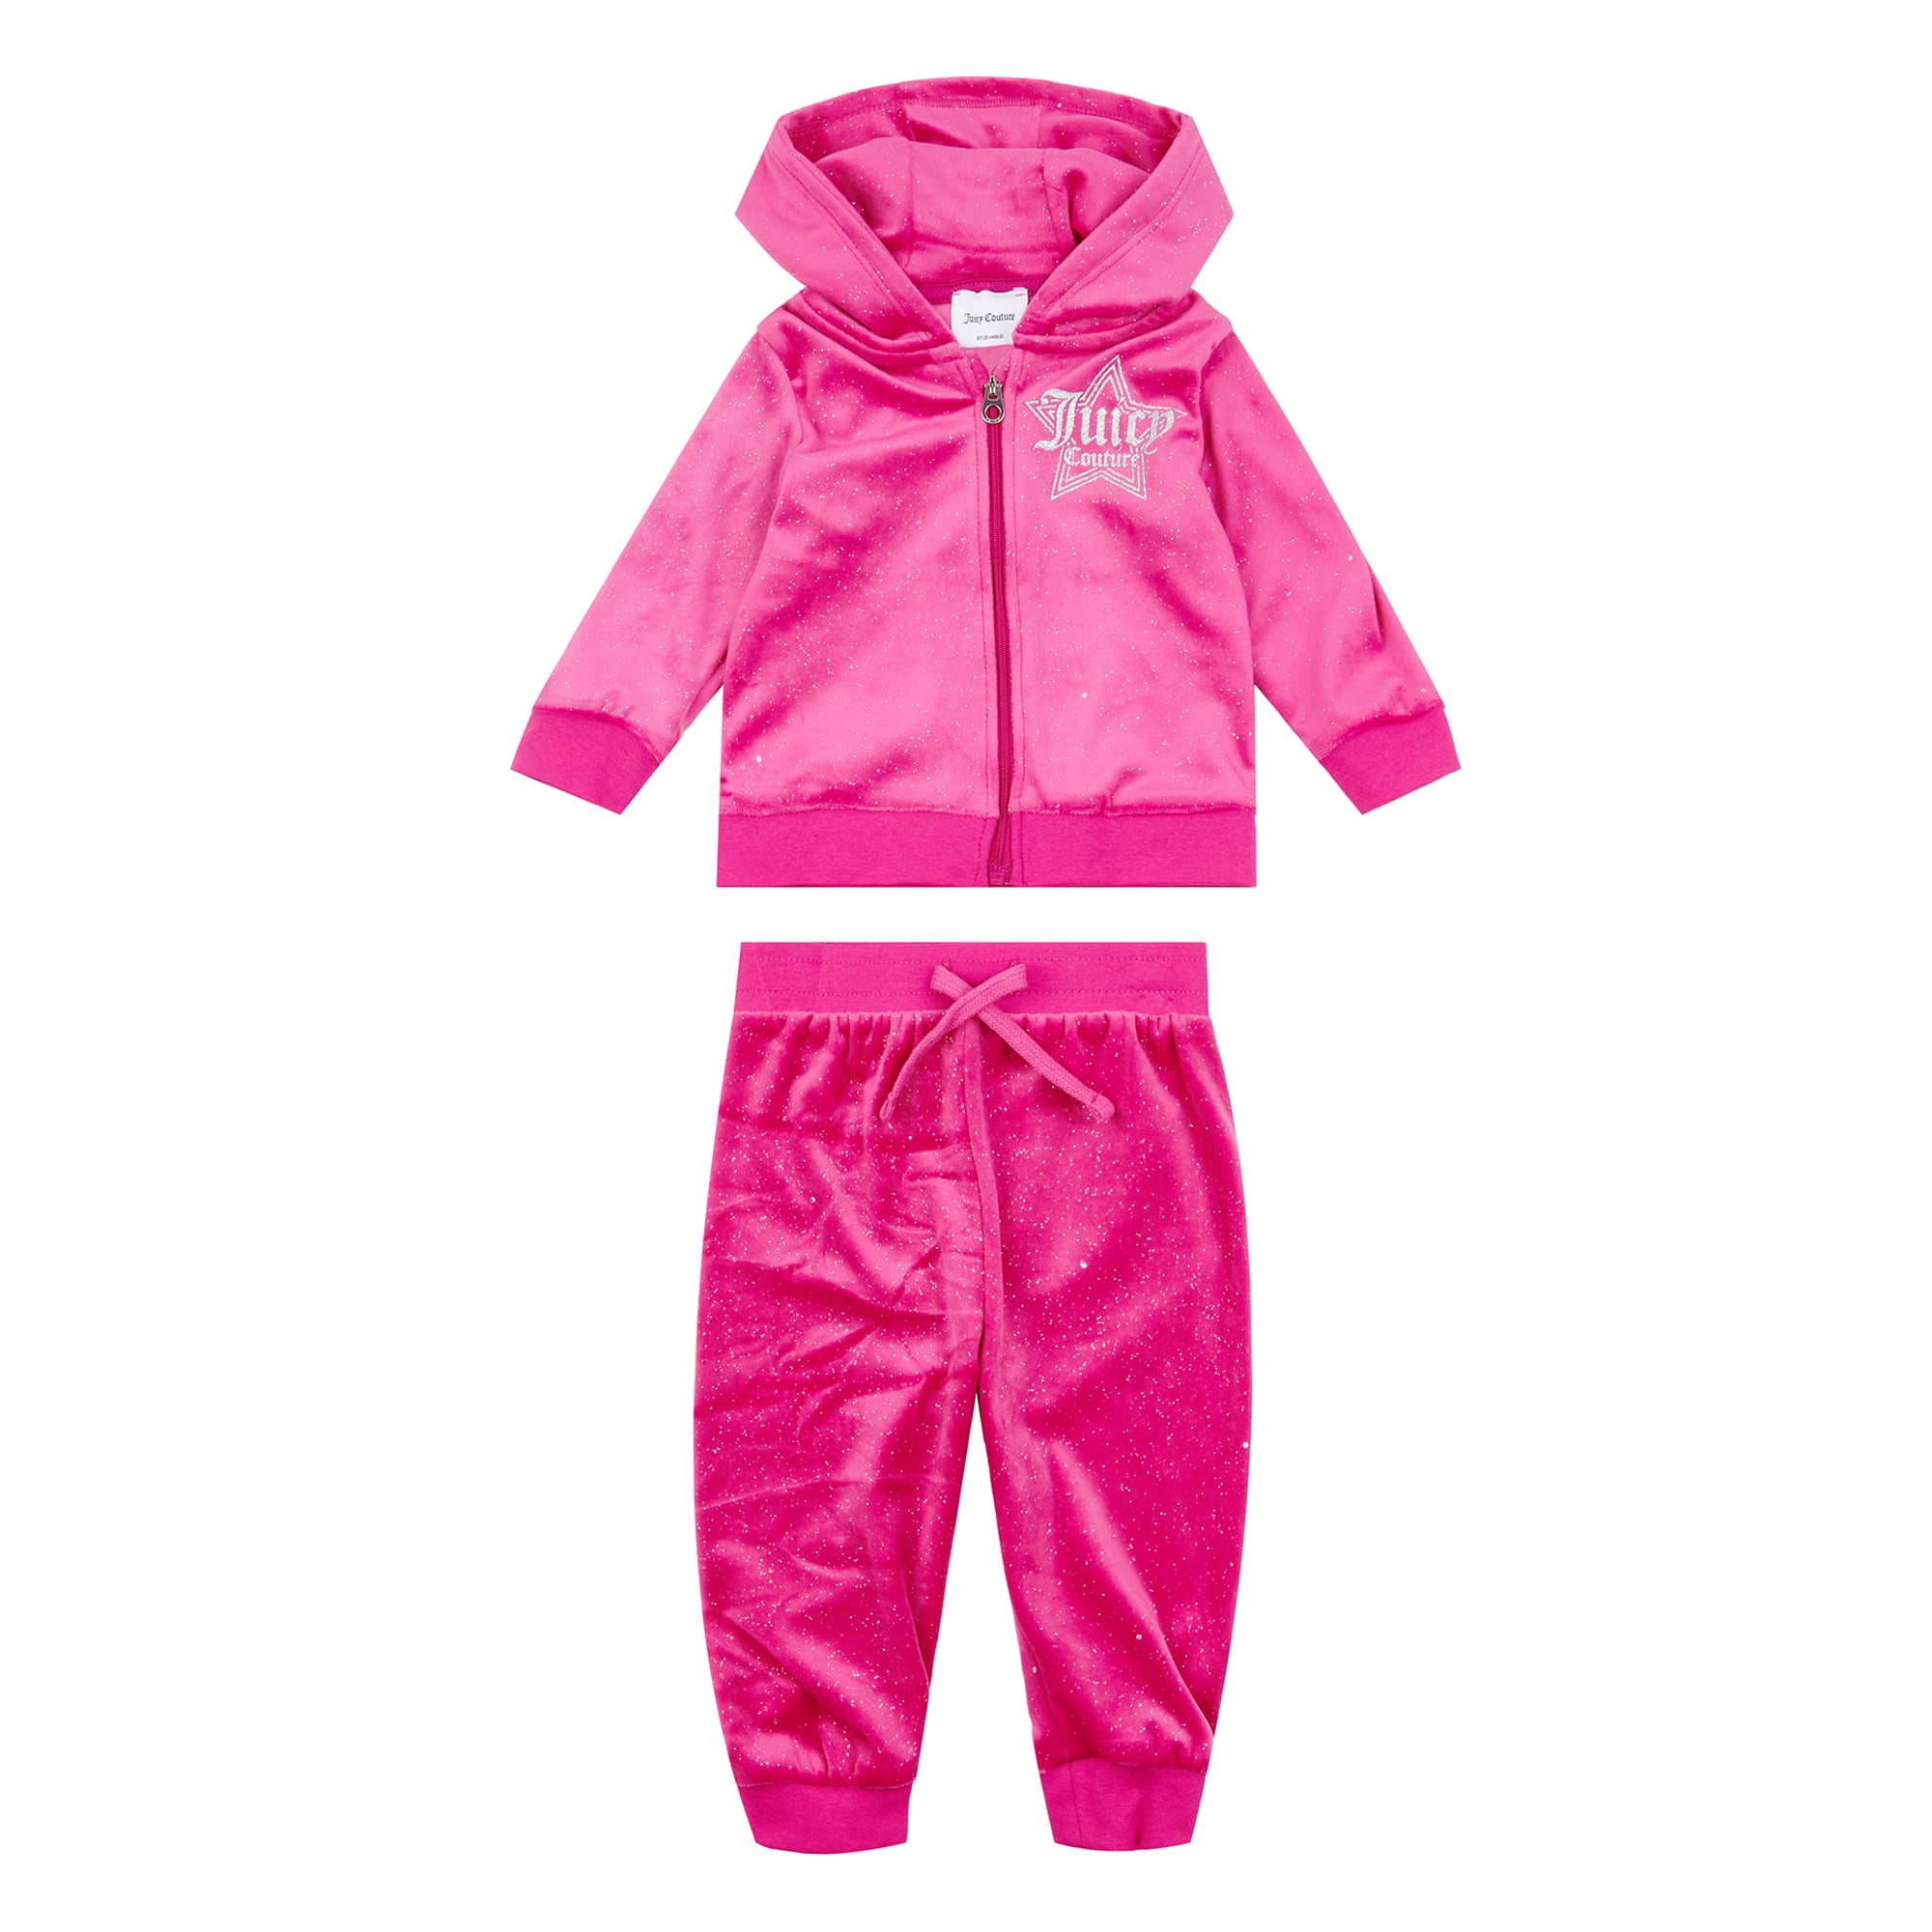 Share more than 211 juicy couture jumpsuit set